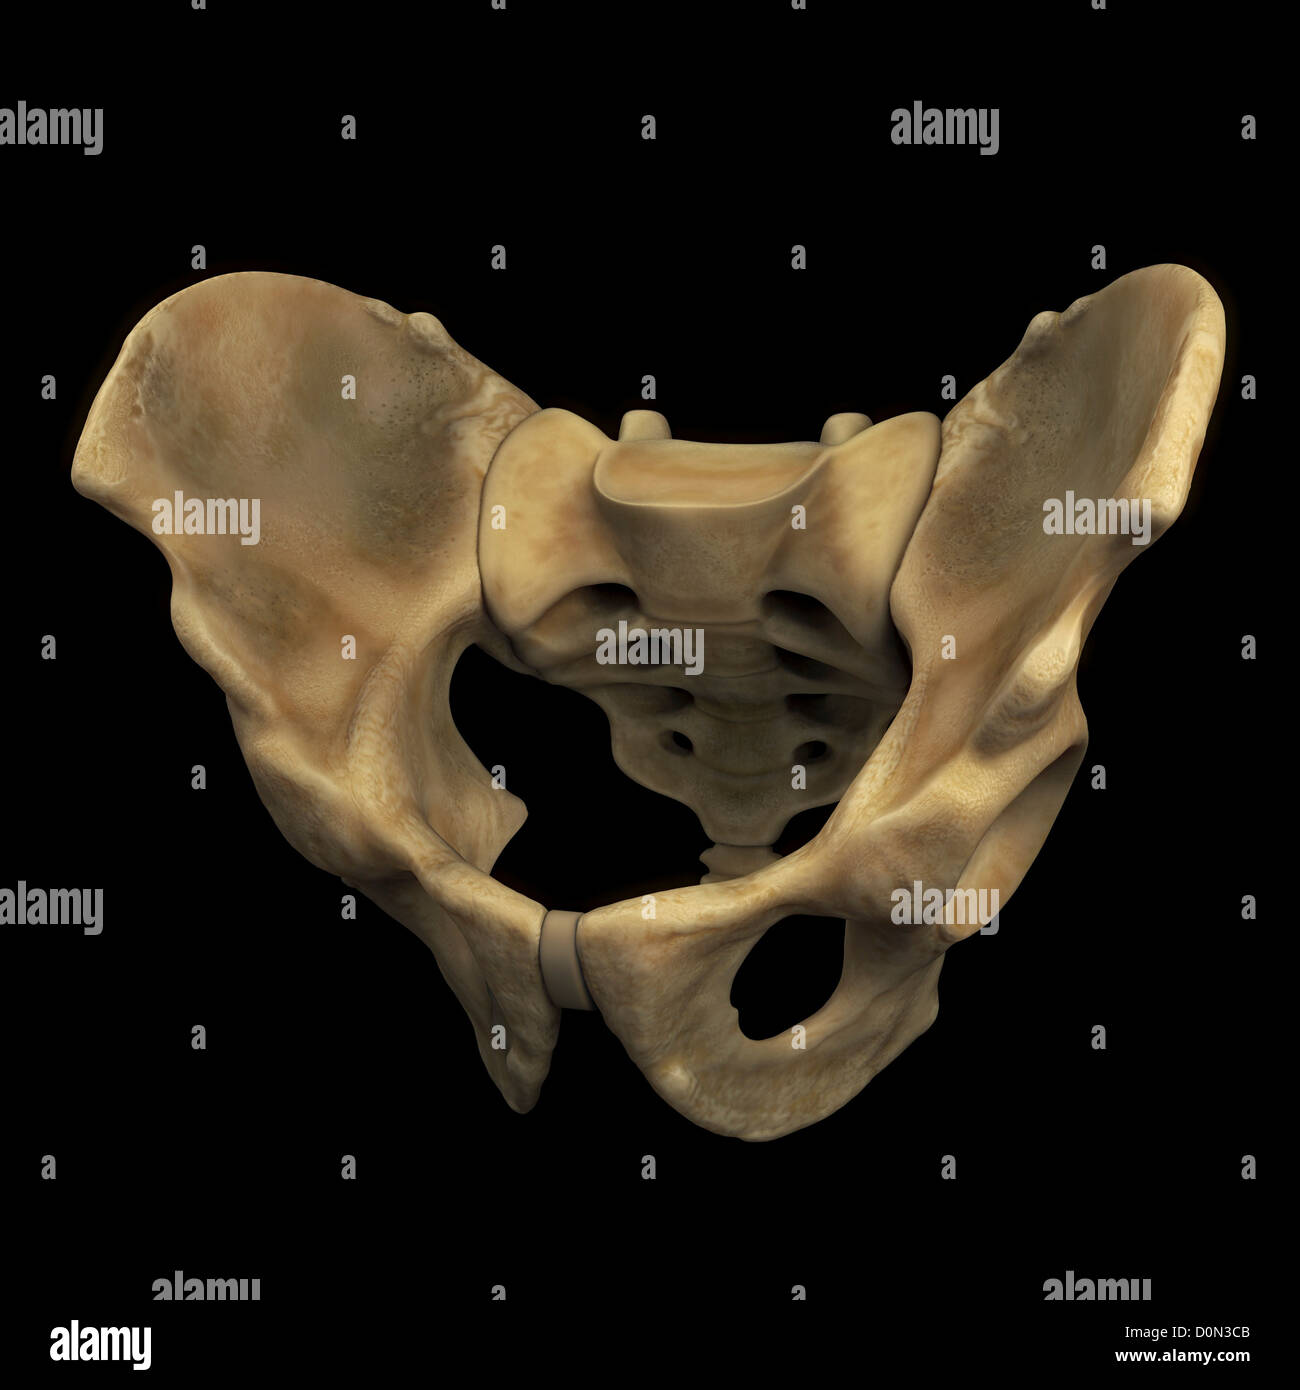 The bones of the male pelvis viewed from a three-quarter perspective. Stock Photo